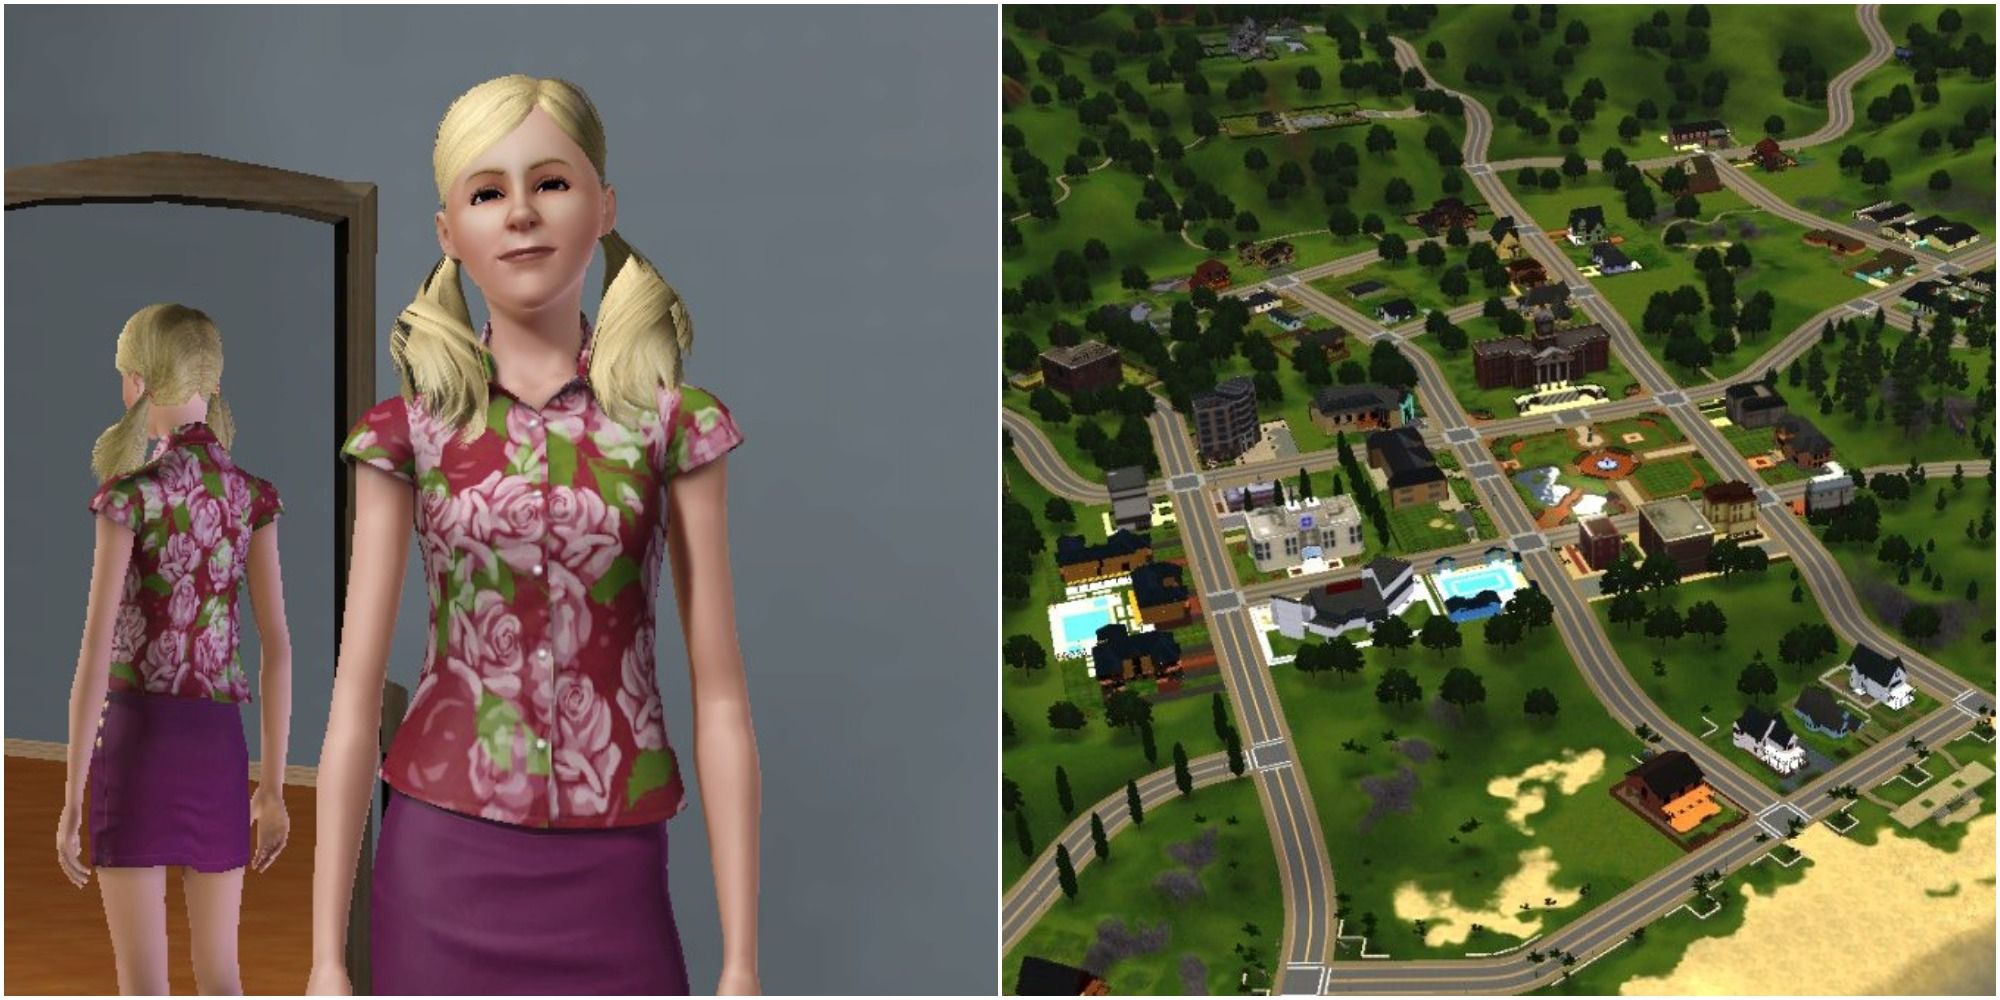 left: Sim with blond pigtails; right: Sims 3 open world